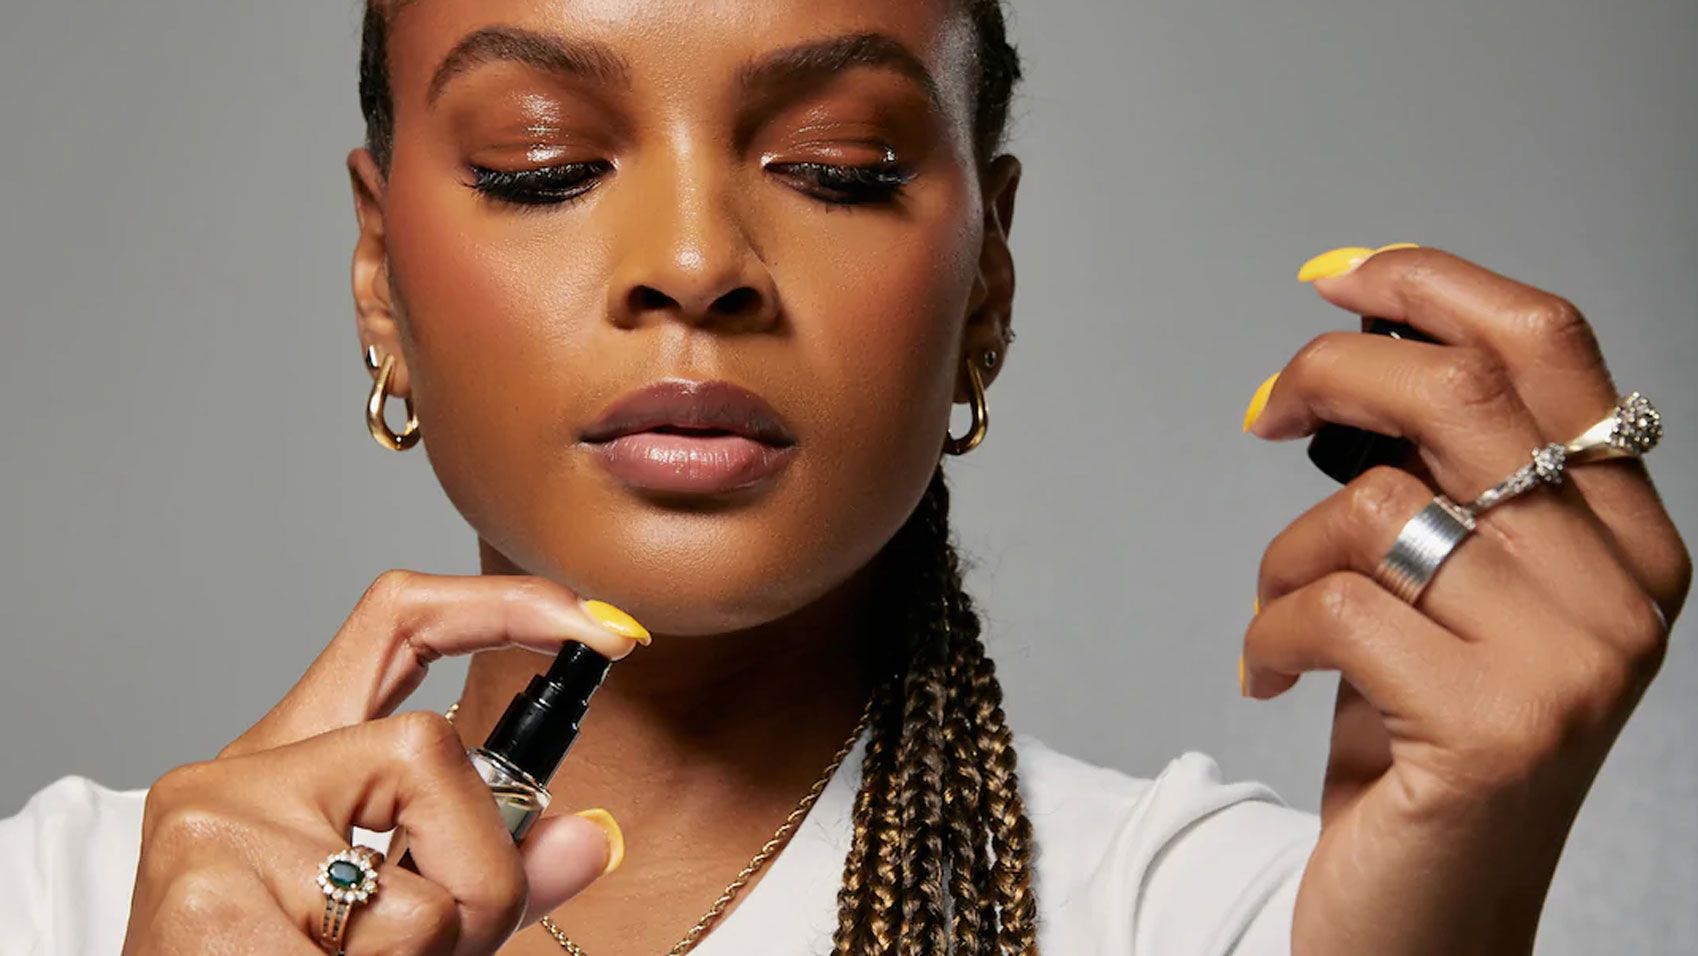 28 Black-Owned Beauty Brands to Shop in 2022: Makeup, Skin Care